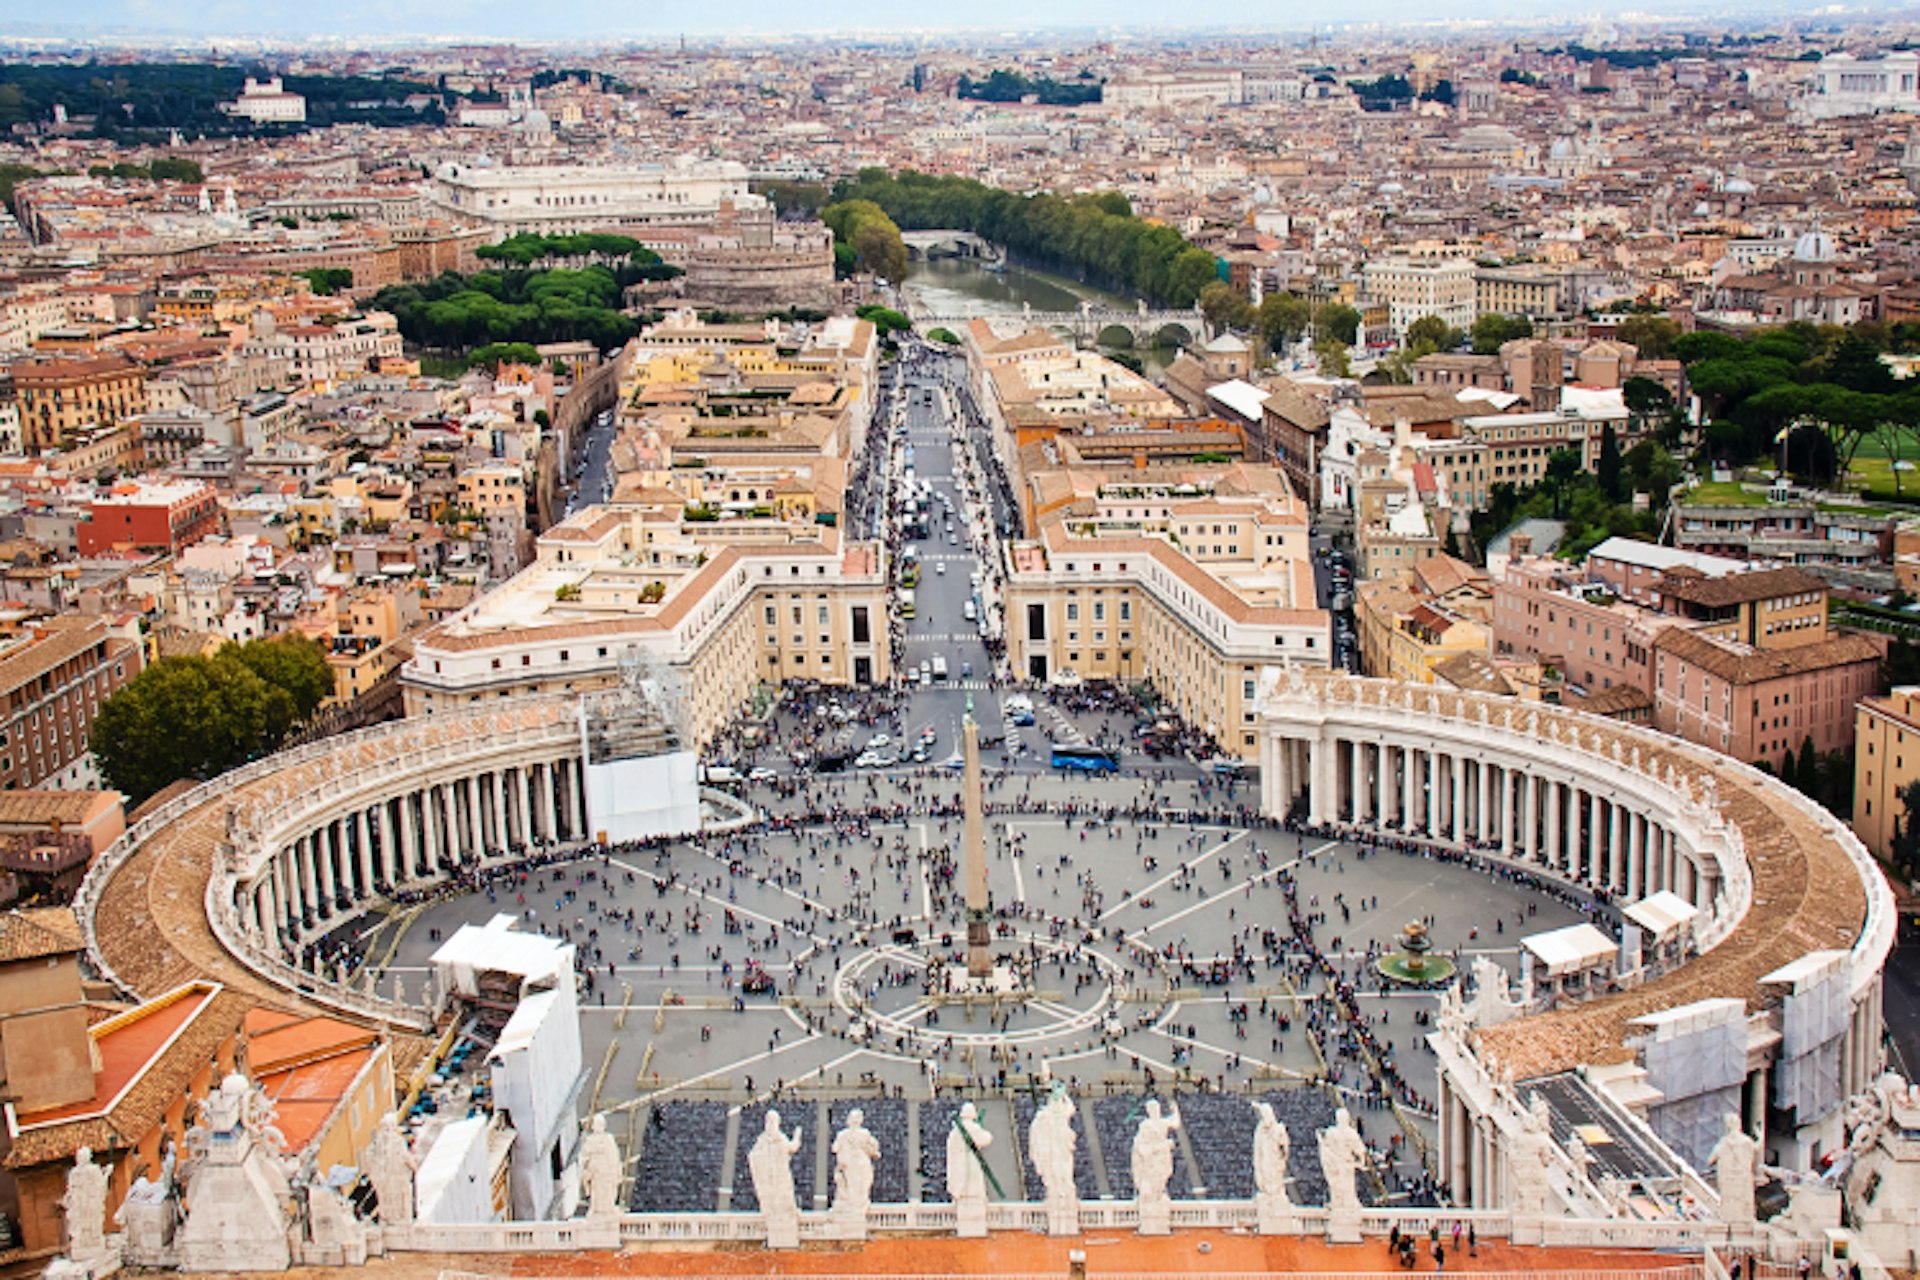 The view over St Peter's Square from the basilica dome.